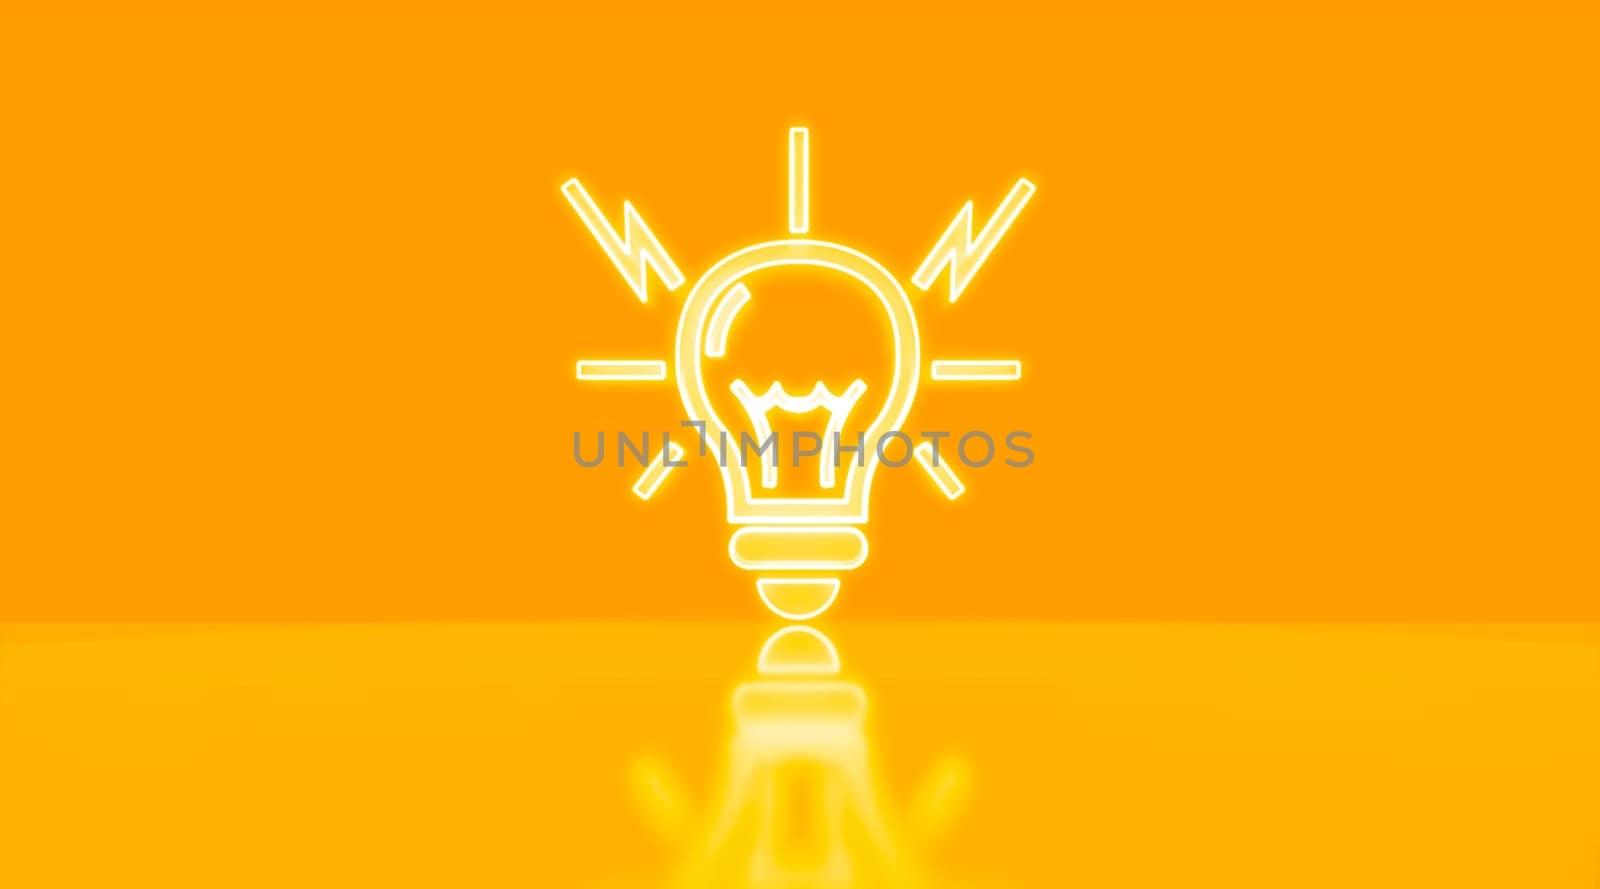 Neon light bulb icon. Glowing neon lamp ideas, innovation concept. 3D rendering.